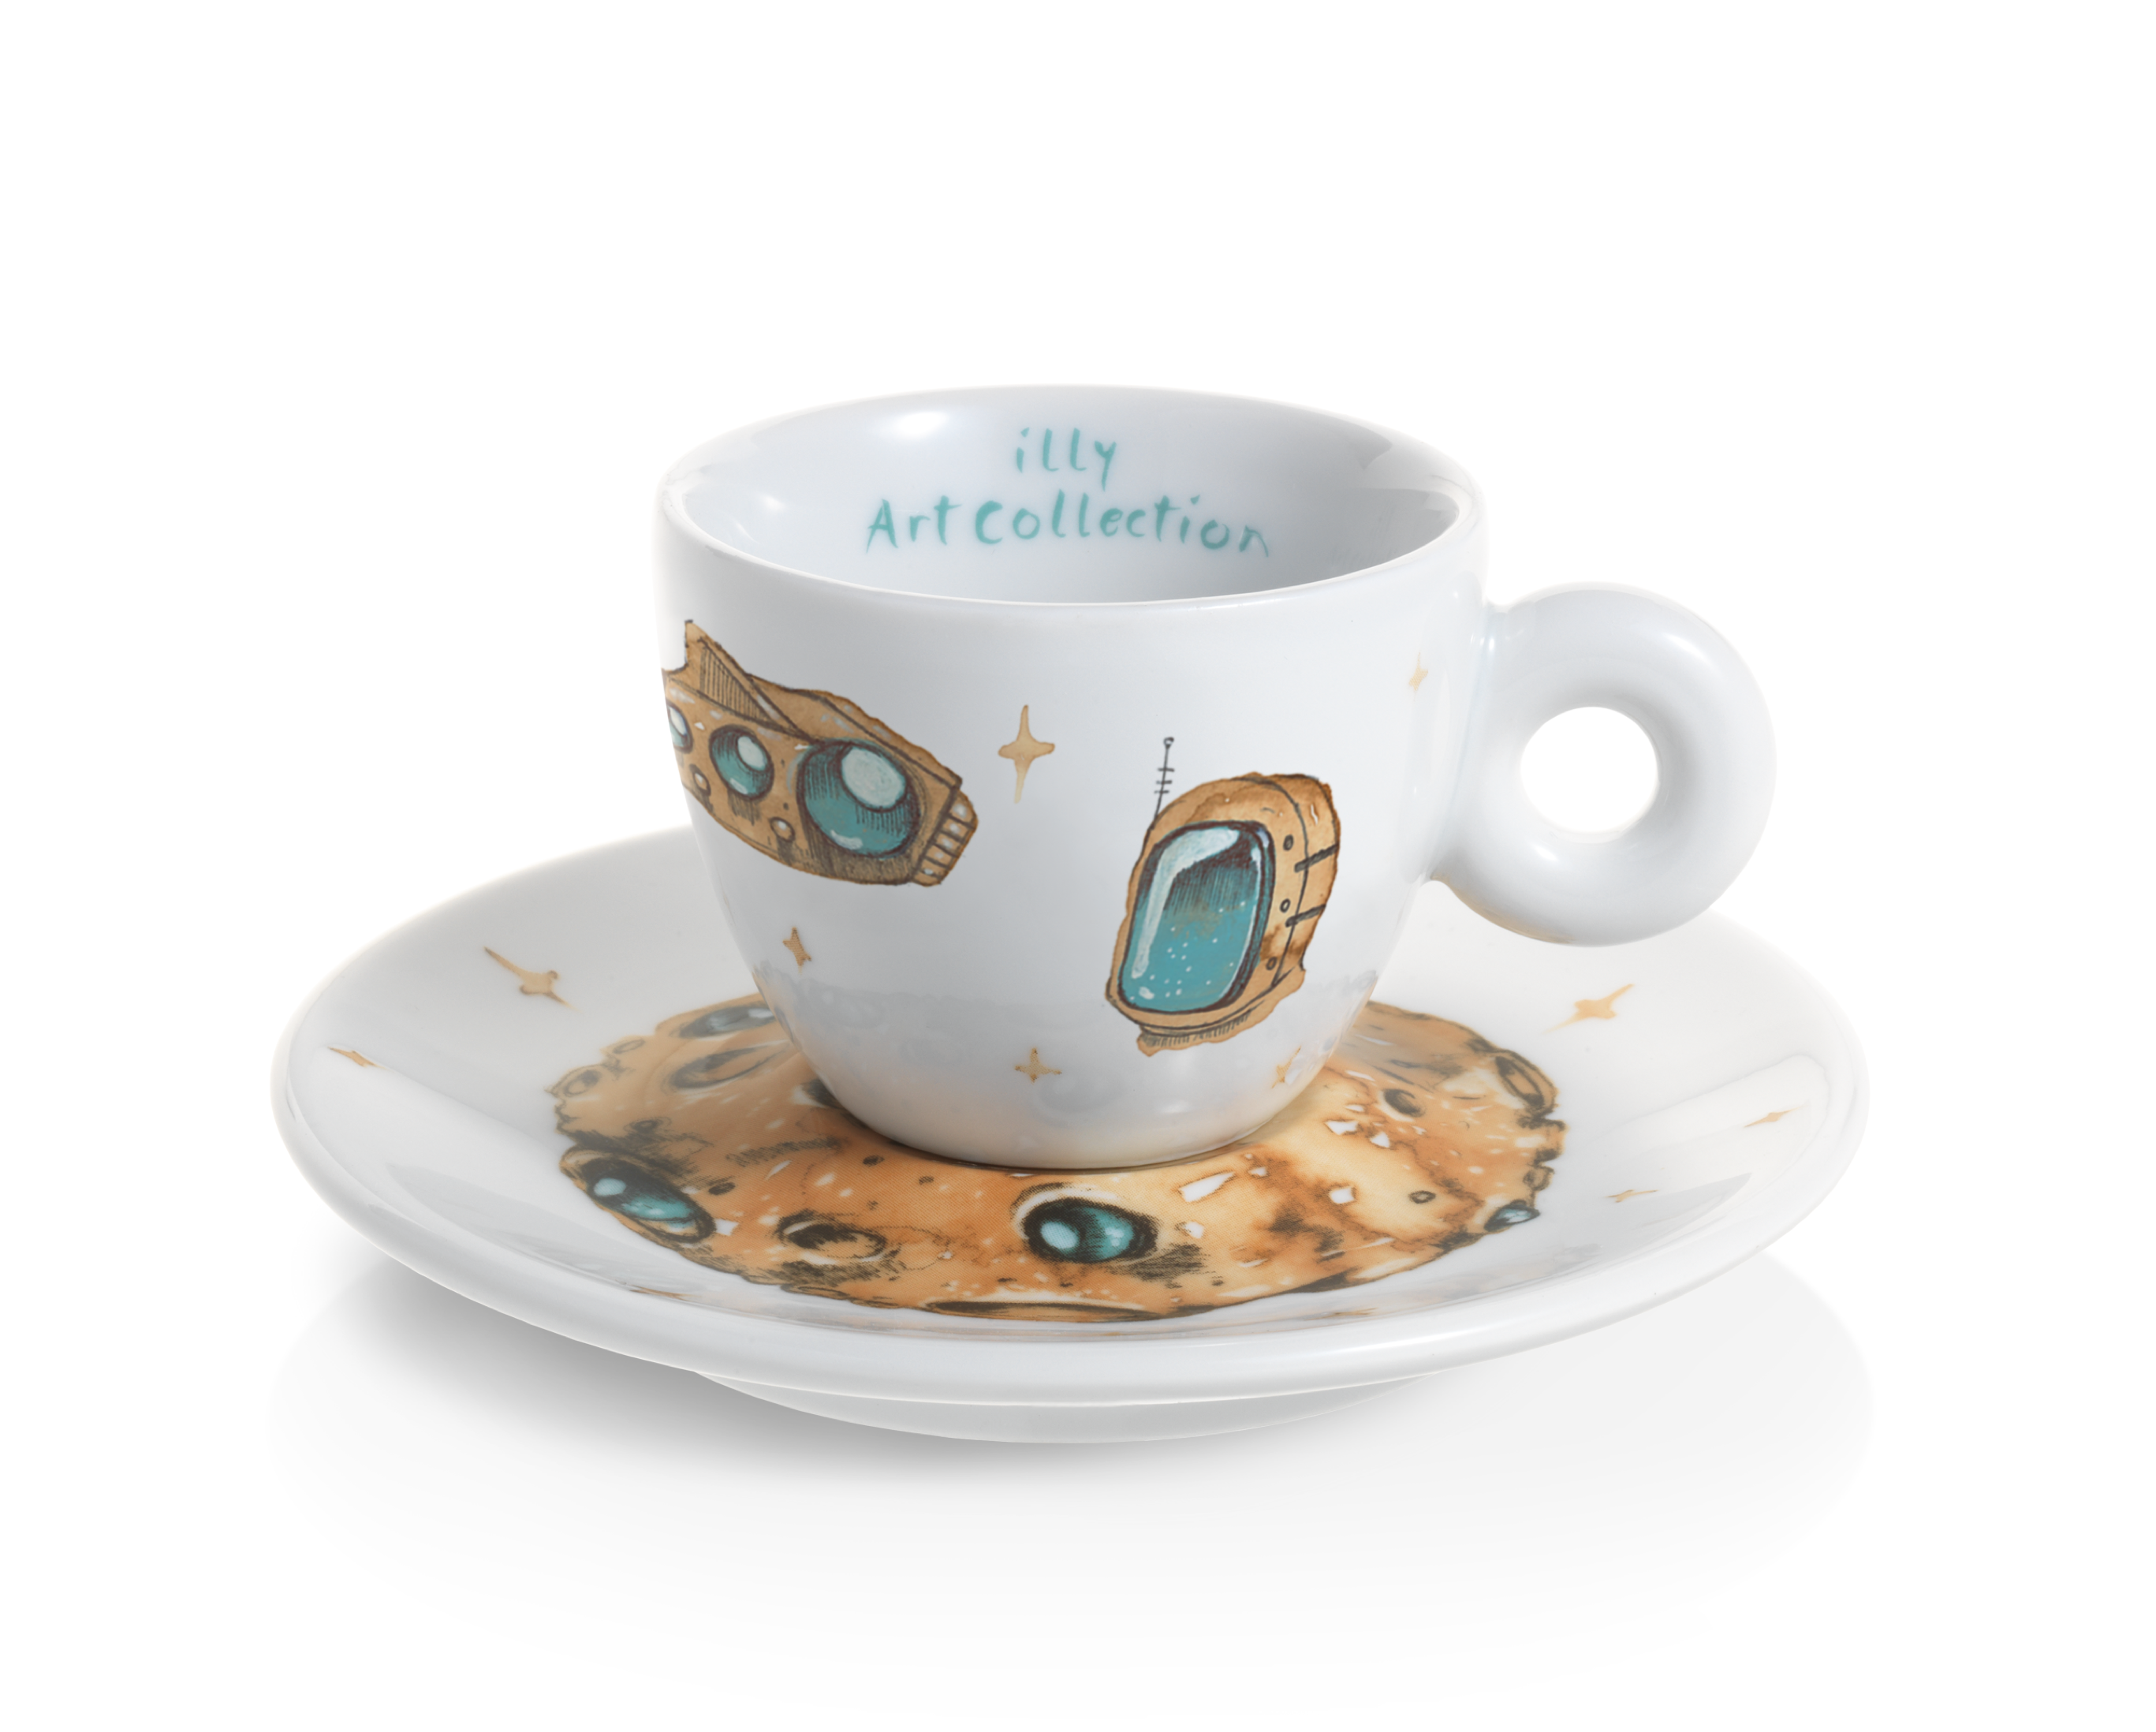 Tasse espresso - illy Art Collection « Coffee drawings » - Max Petrone